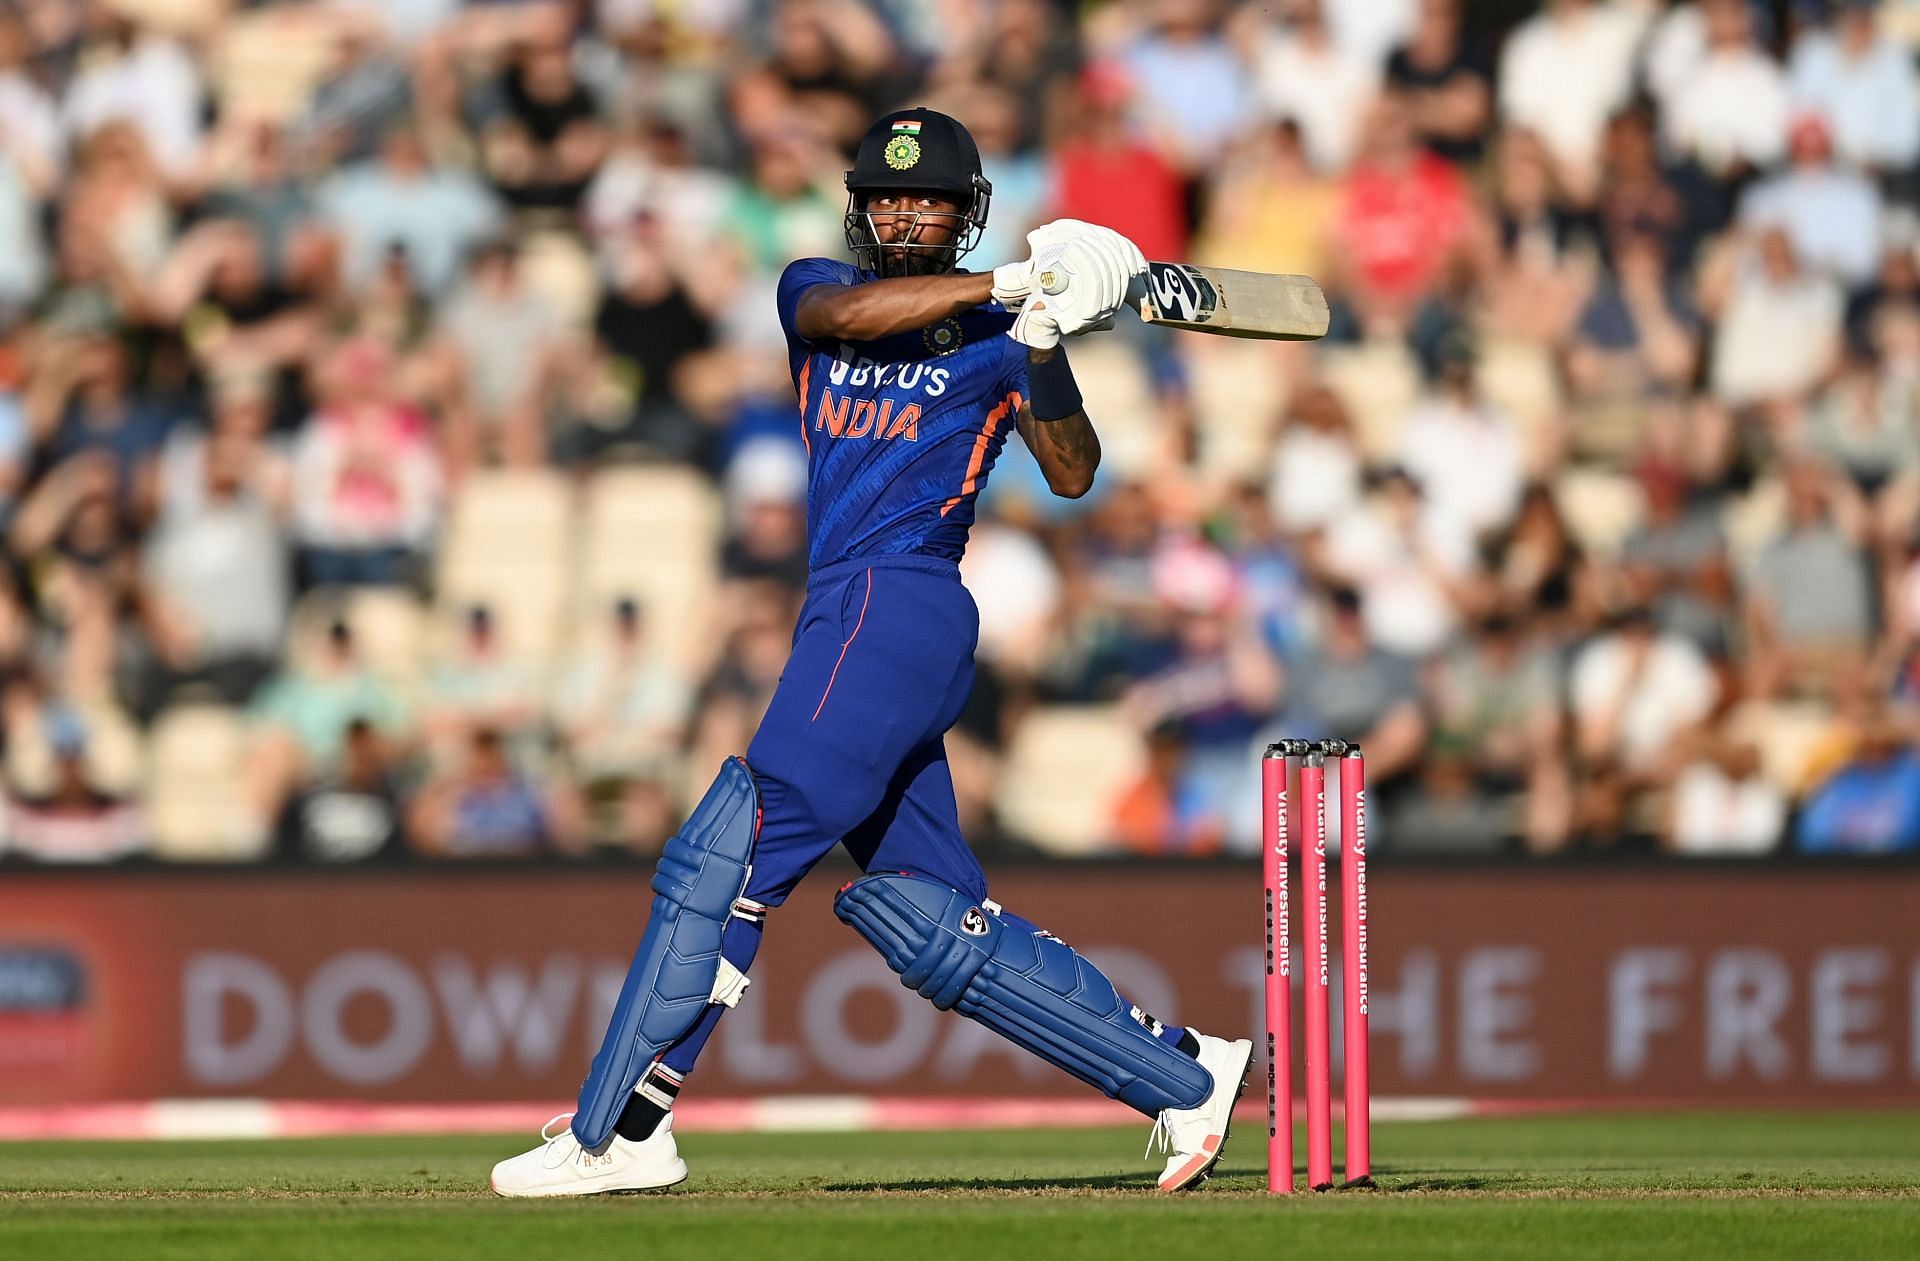 Hardik Pandya seems to have nicely settled into his role at No. 5 (Image Courtesy: Getty)